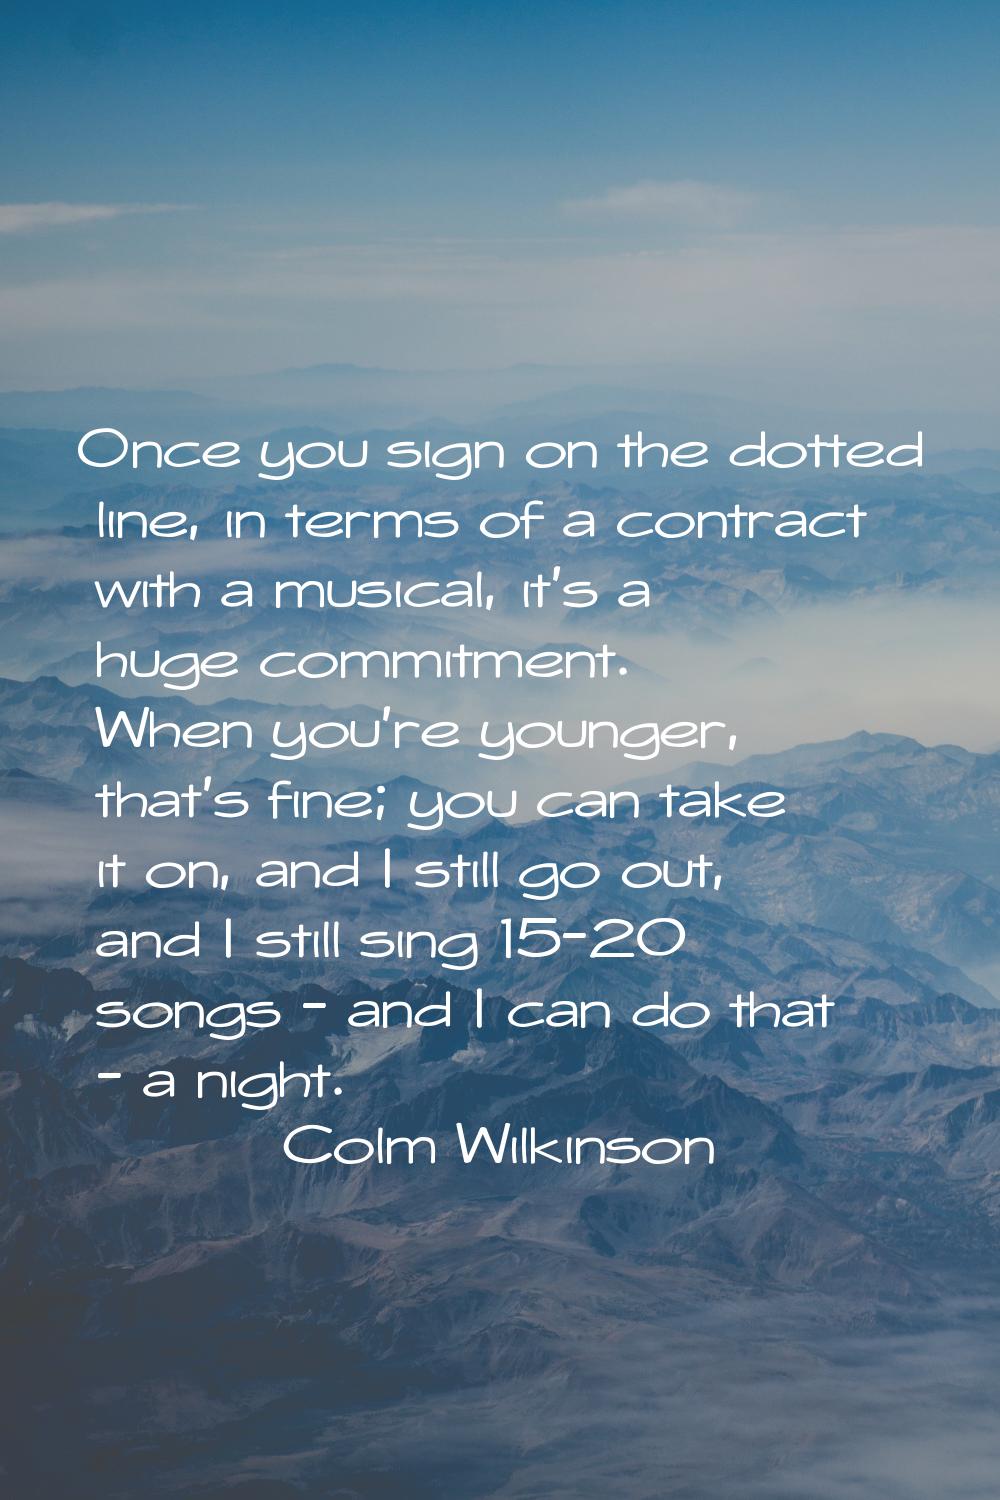 Once you sign on the dotted line, in terms of a contract with a musical, it's a huge commitment. Wh